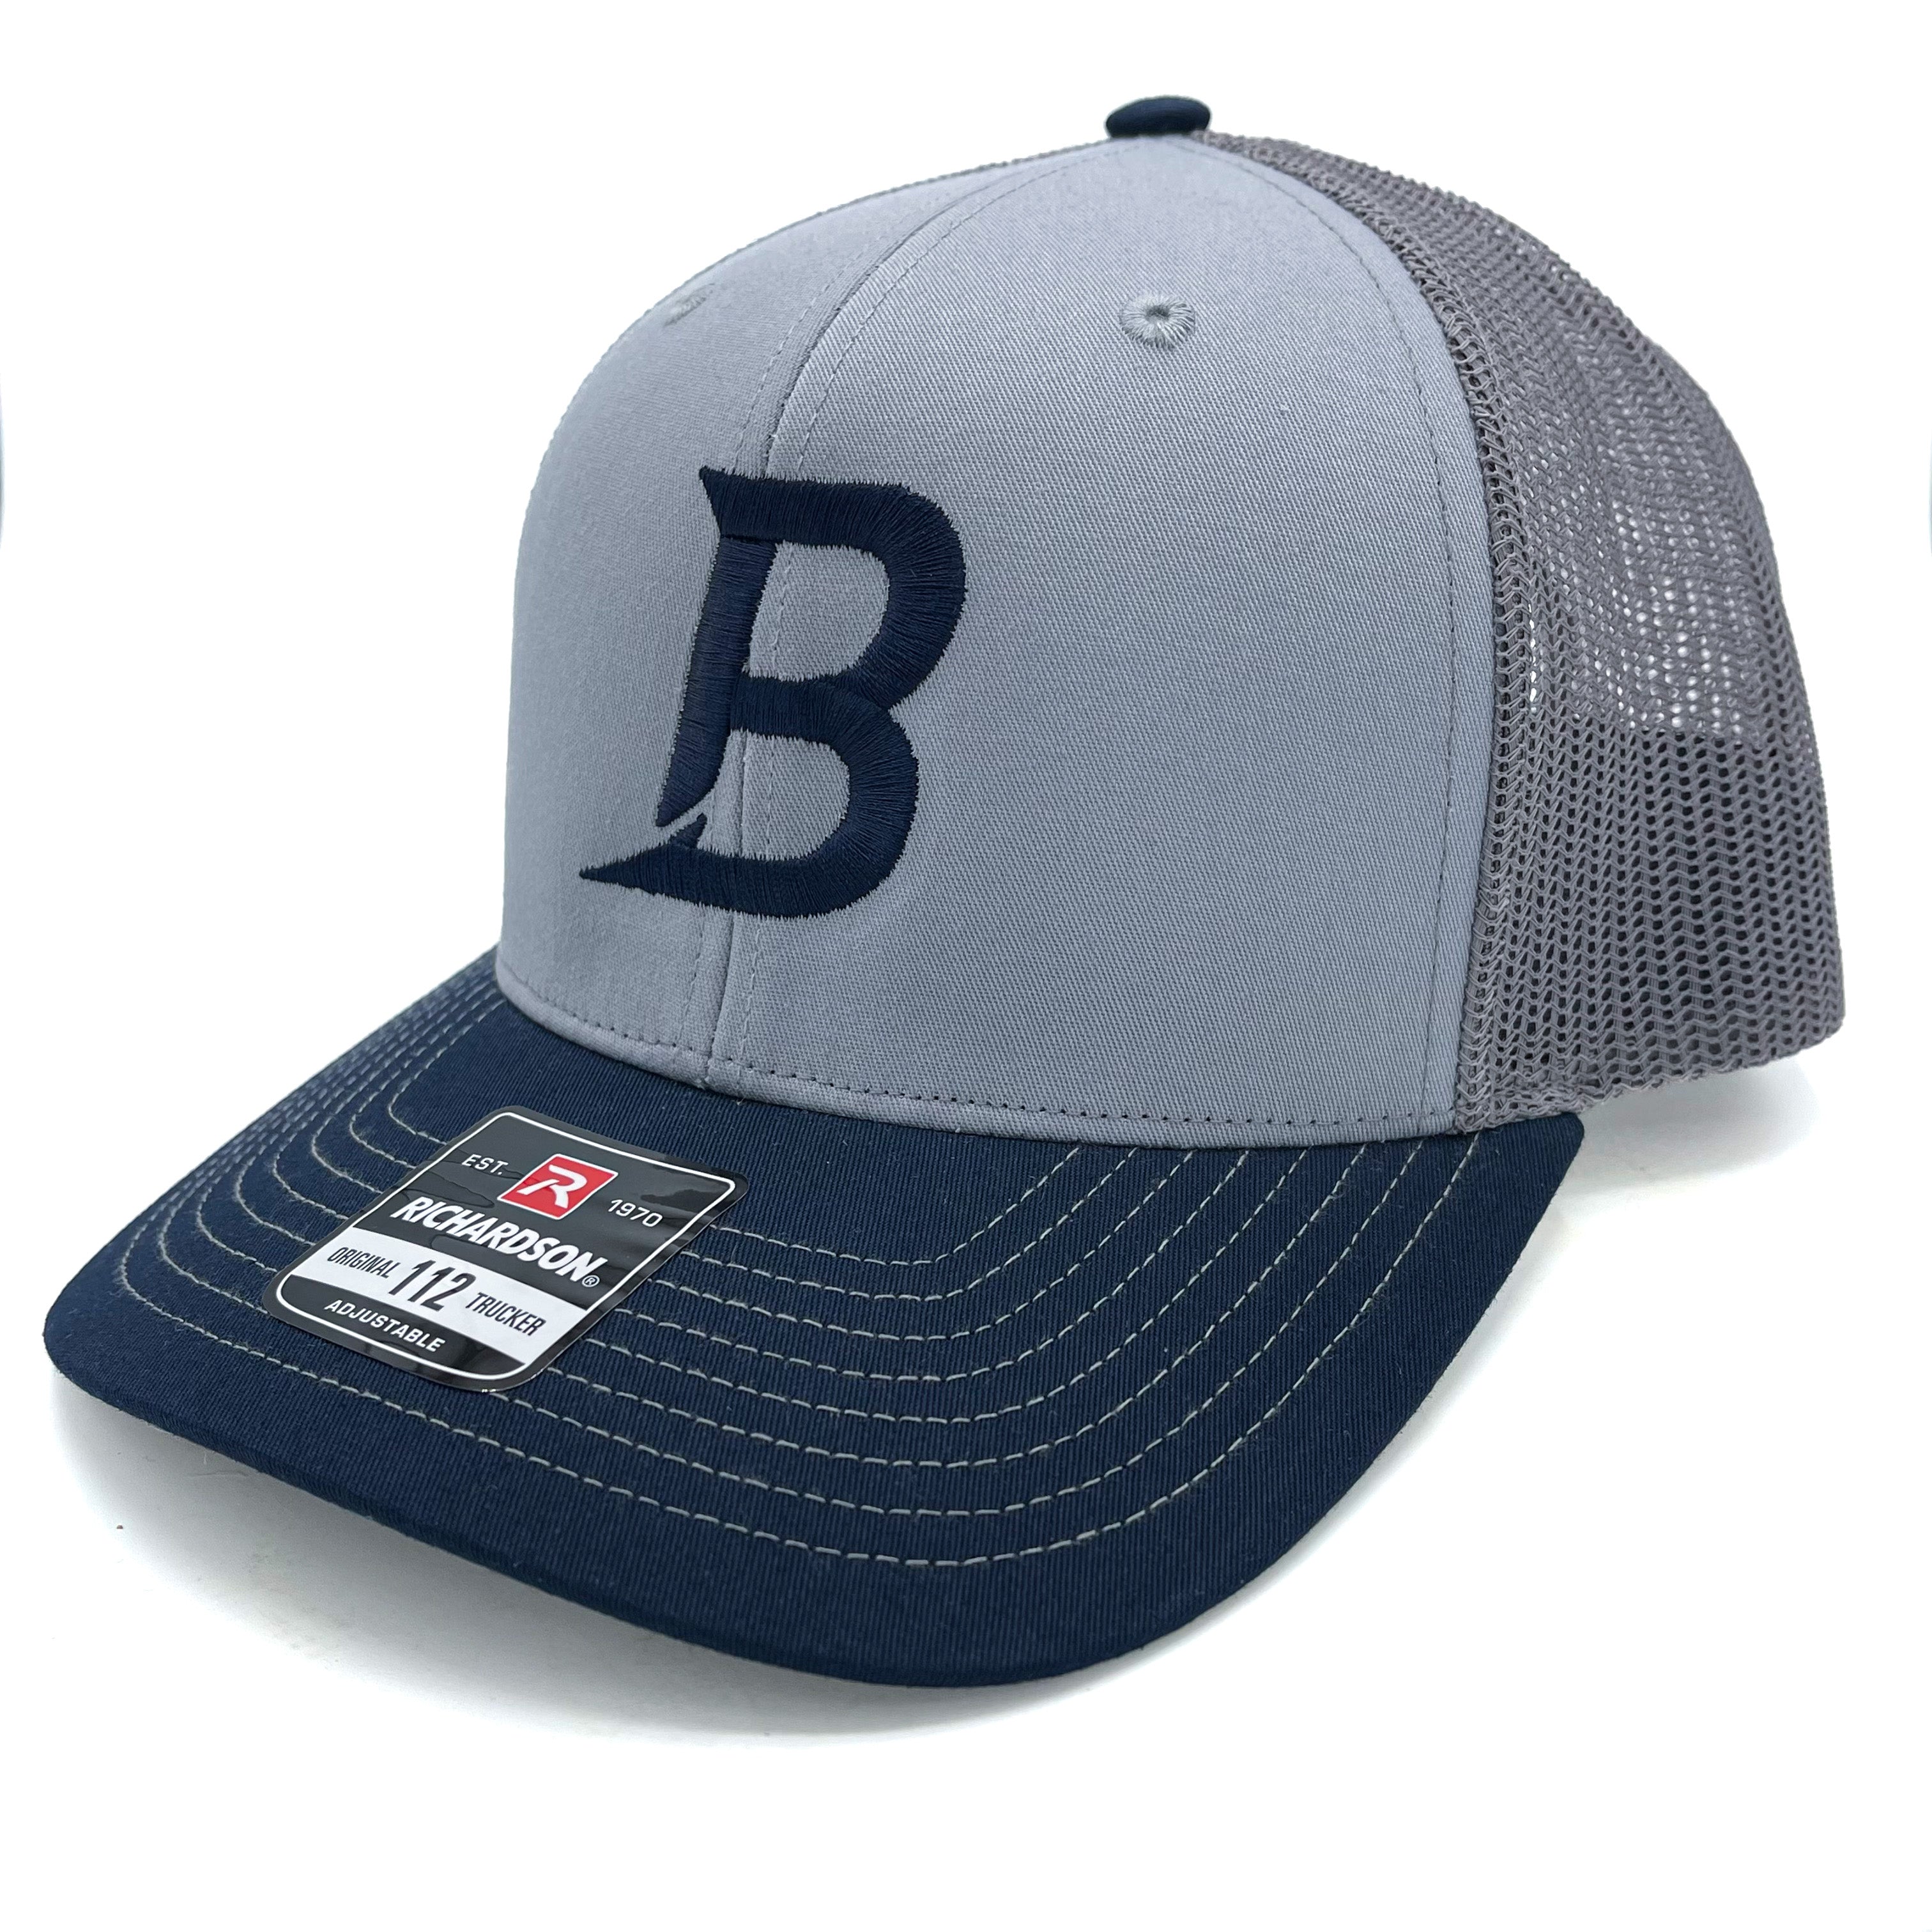 TriColor Navy/Charcoal/Grey Bizz Snap Embroidered “B”